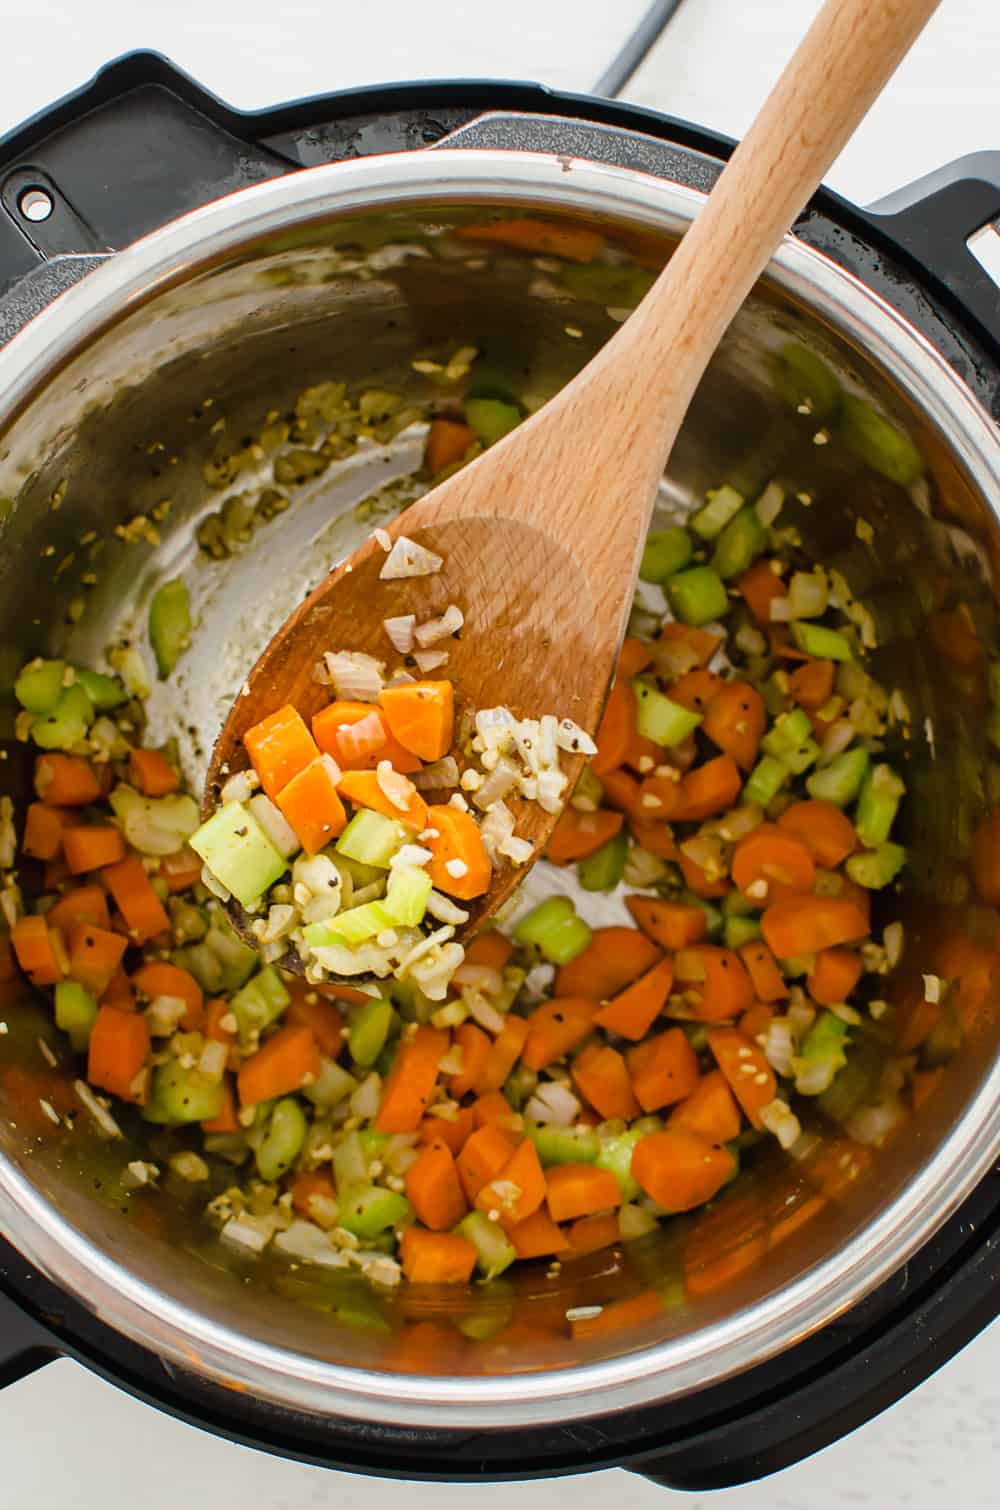 Carrots, celery, onion, and garlic sauteing in an Instant Pot.